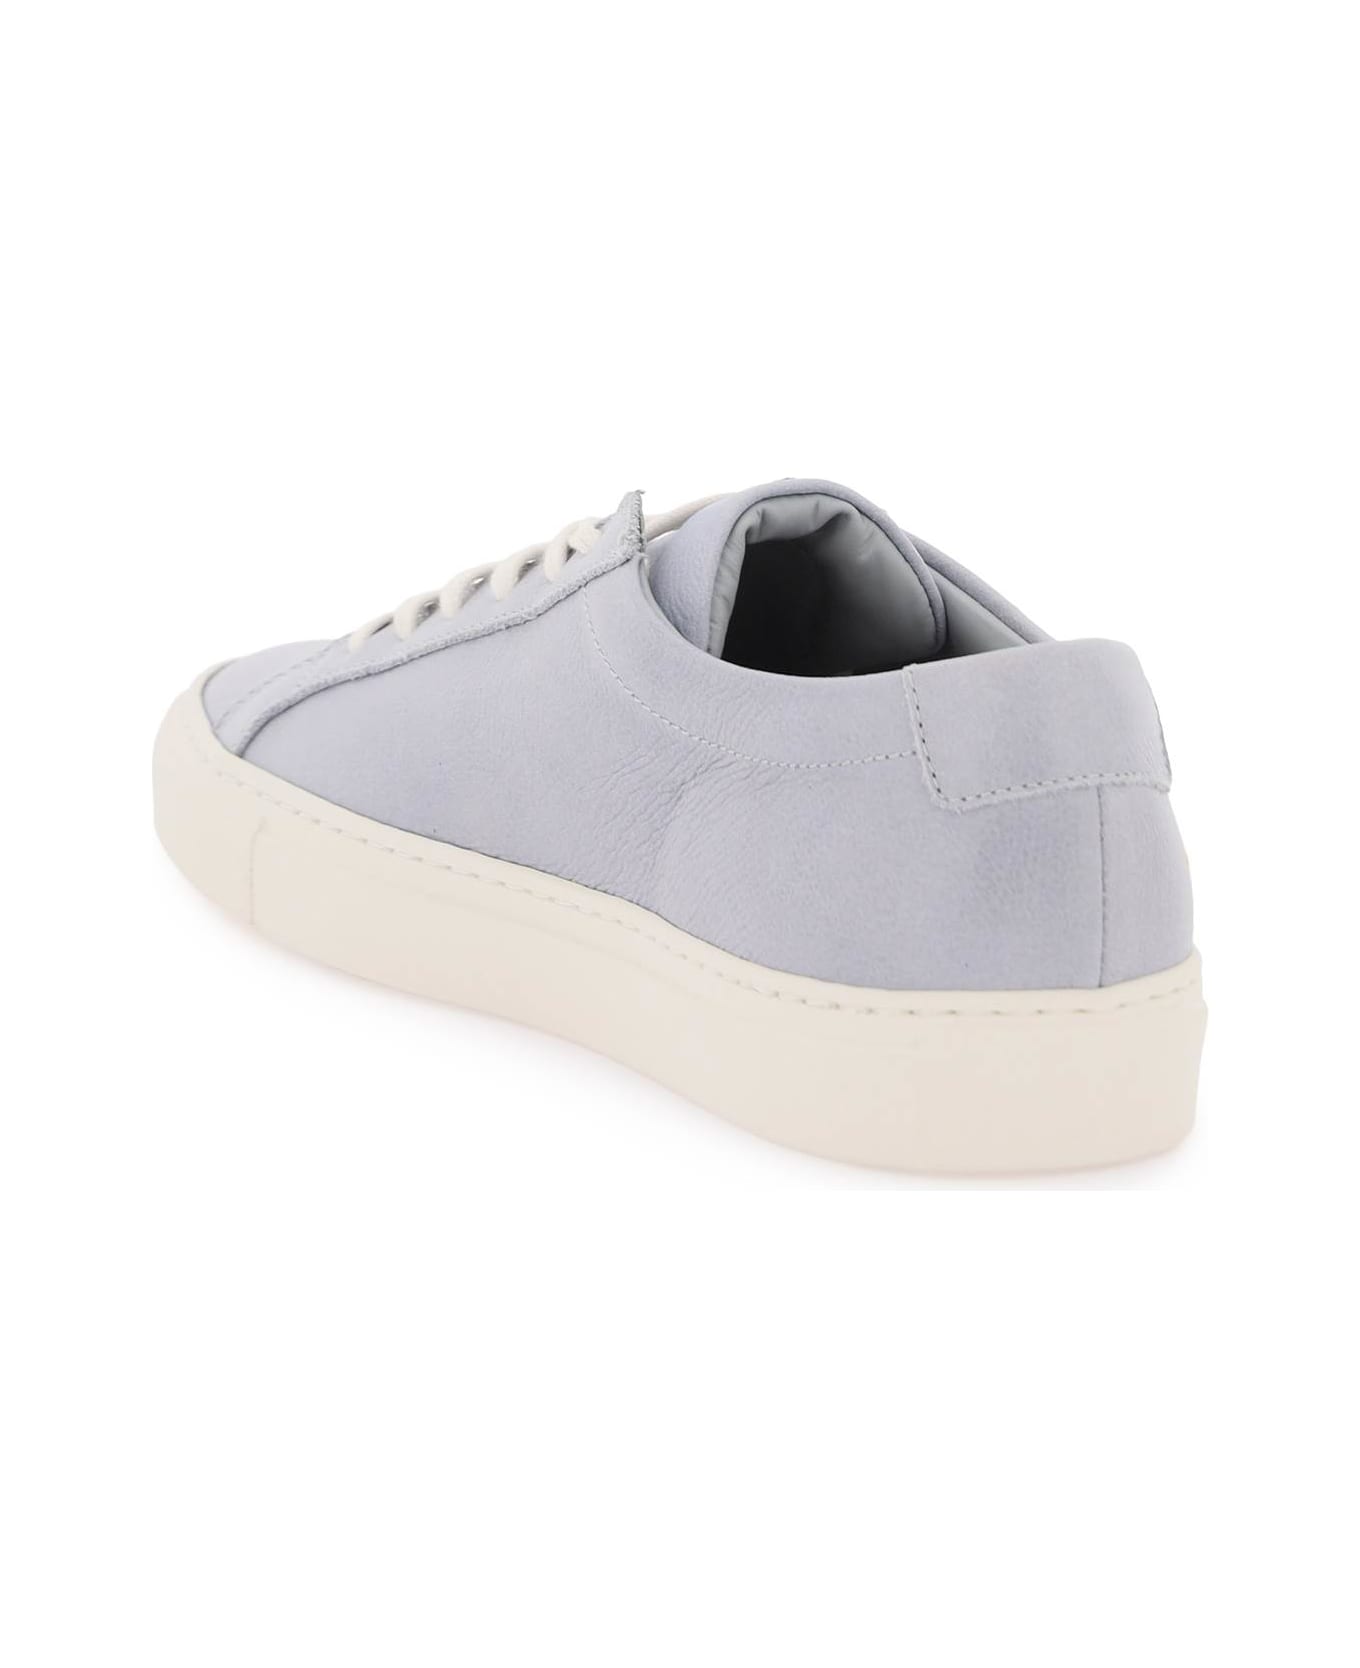 Common Projects Original Achilles Leather Sneakers - POWDER BLUE (Light blue) スニーカー